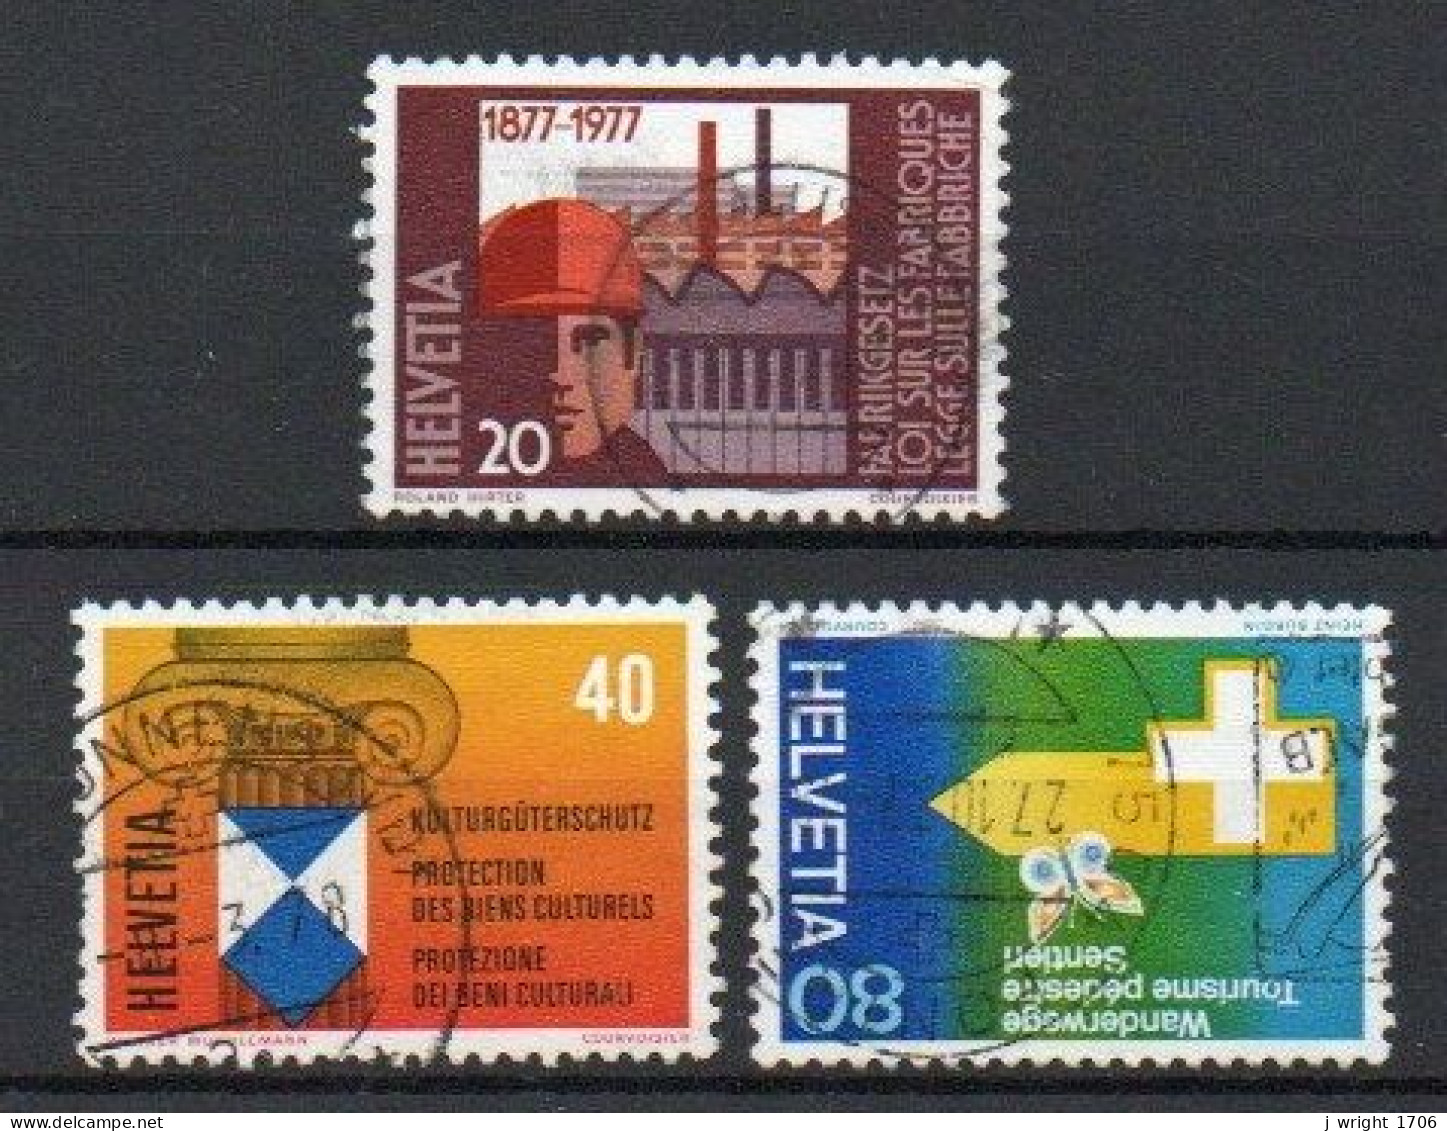 Switzerland, 1977, Publicity Issue, Set, USED - Used Stamps